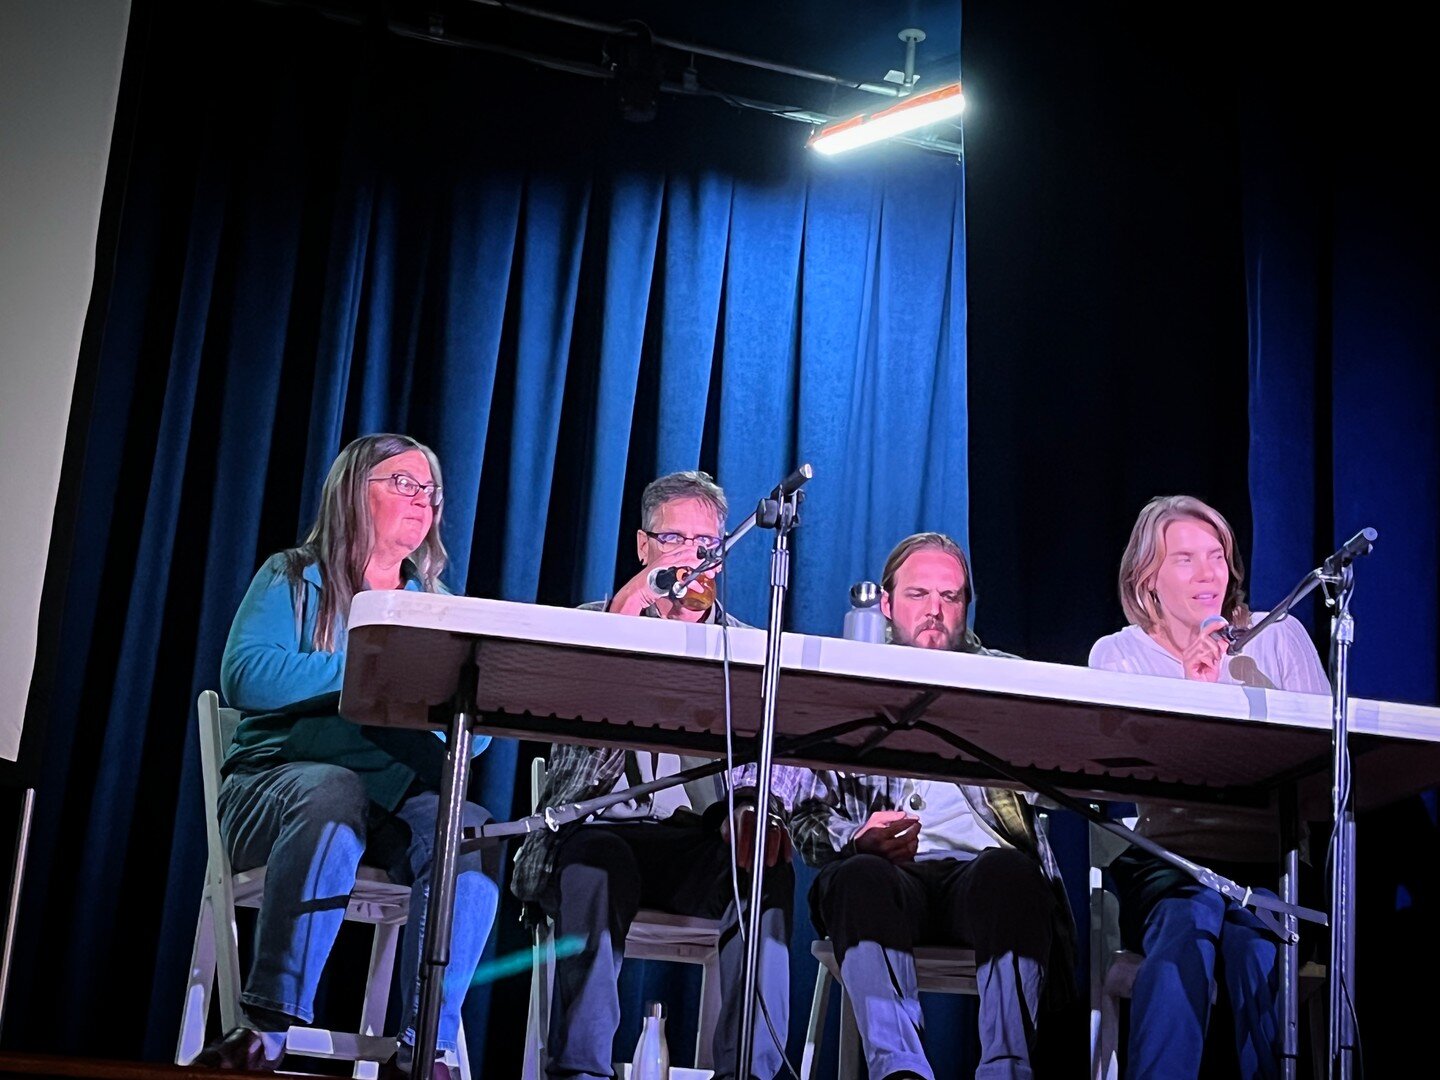 Yet another fantastic opportunity to engage with the community was at a panel at the Which Way the Wind Festival. Held each year in October to commemorate the non-violent anti-nuclear protests waged upon the high seas by the Golden Rule ship, Jack Ir